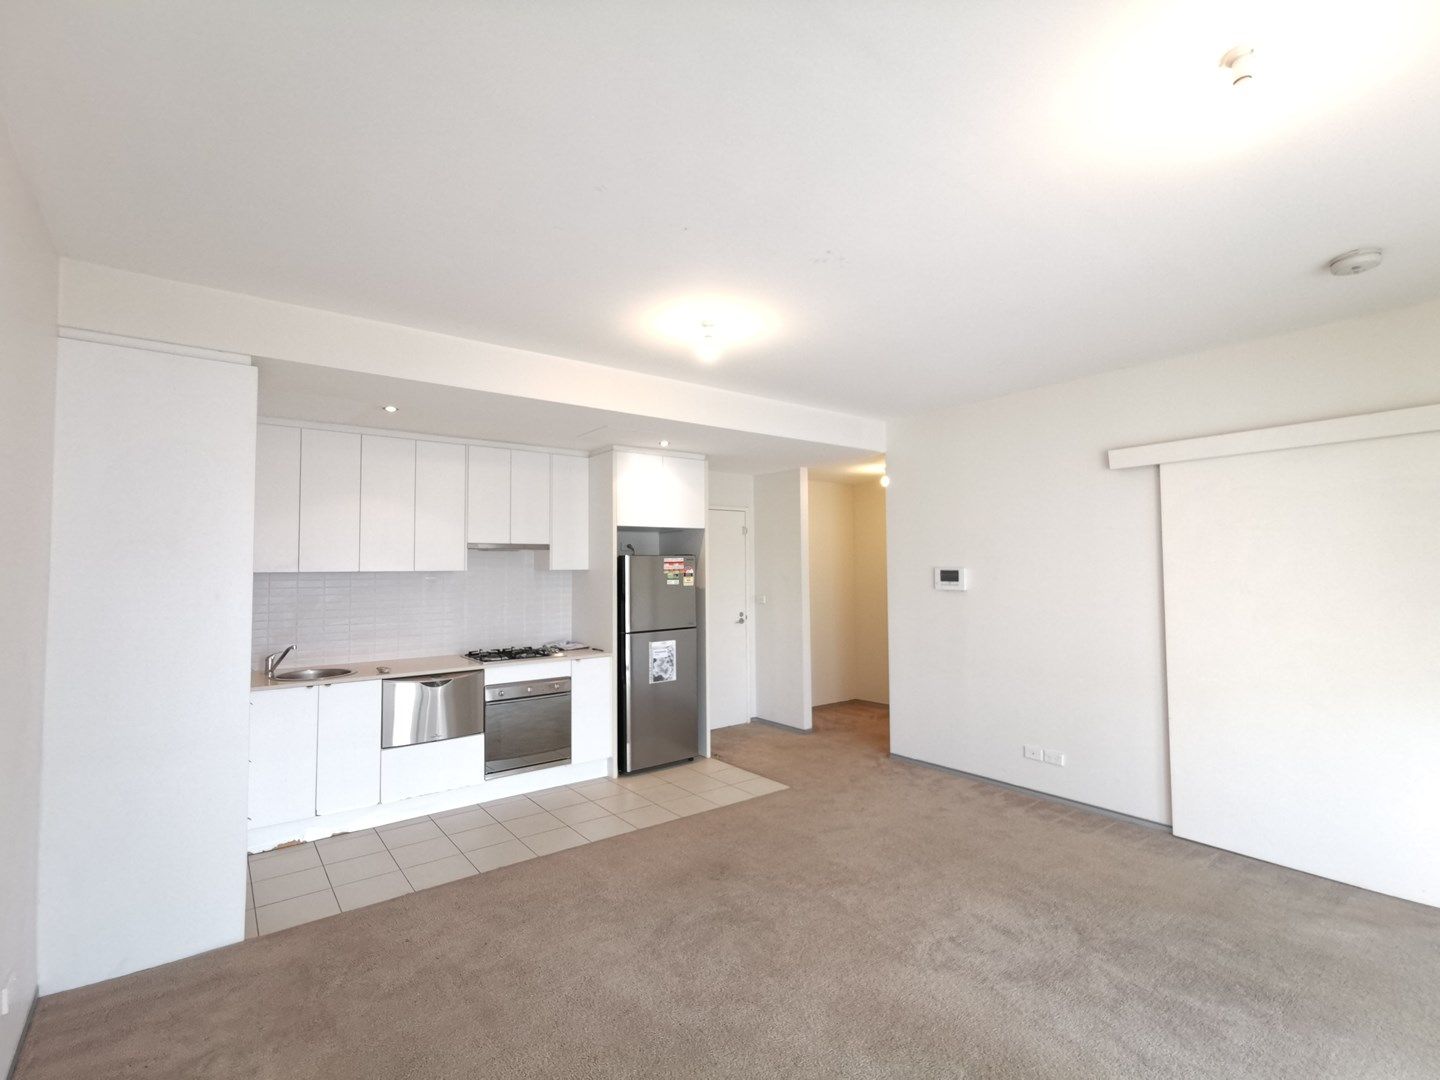 1 bedrooms Apartment / Unit / Flat in A503/10-16 Marquet Street RHODES NSW, 2138